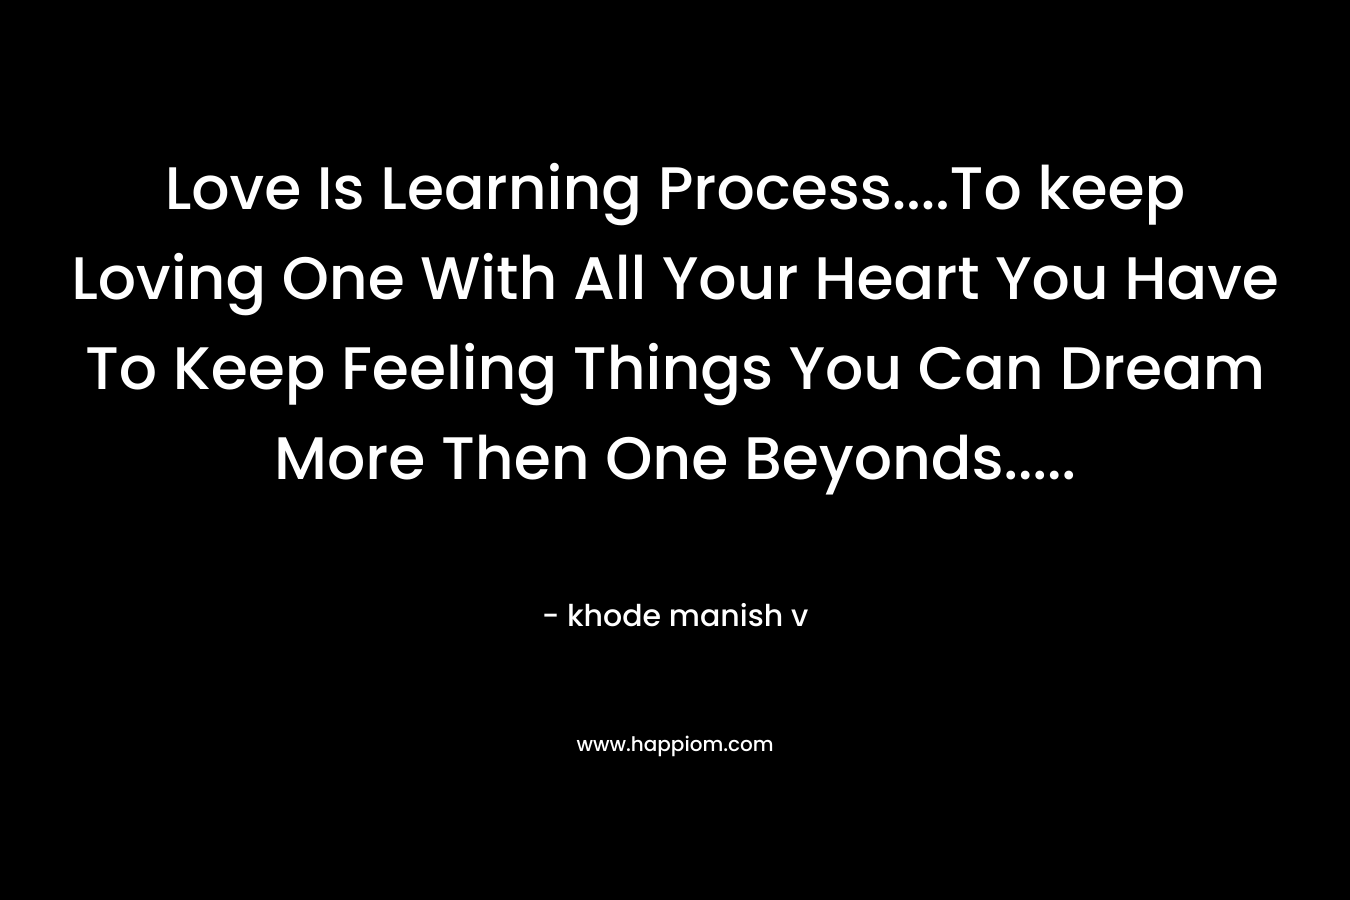 Love Is Learning Process....To keep Loving One With All Your Heart You Have To Keep Feeling Things You Can Dream More Then One Beyonds.....